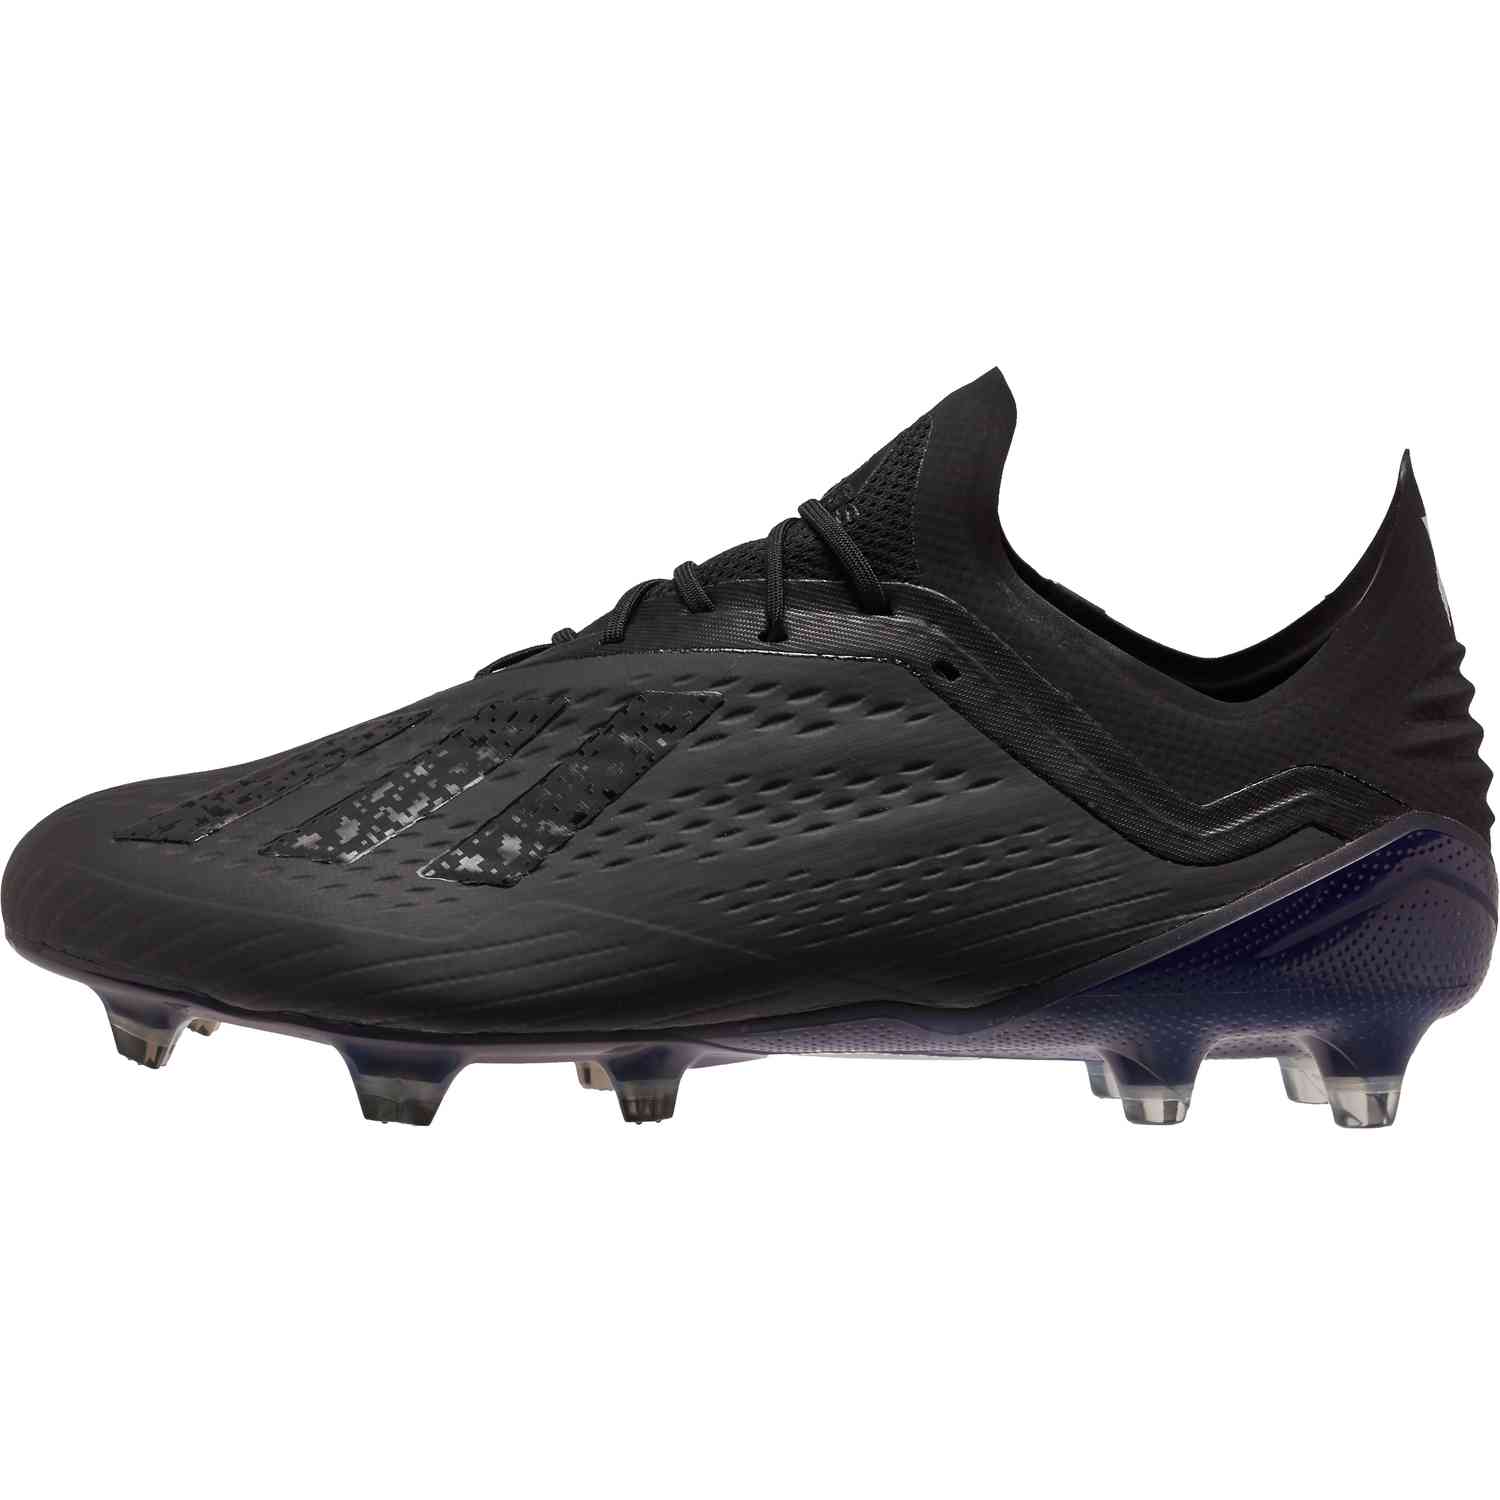 Adidas X 18.1 Fg Black Online Sale, UP TO 62% OFF